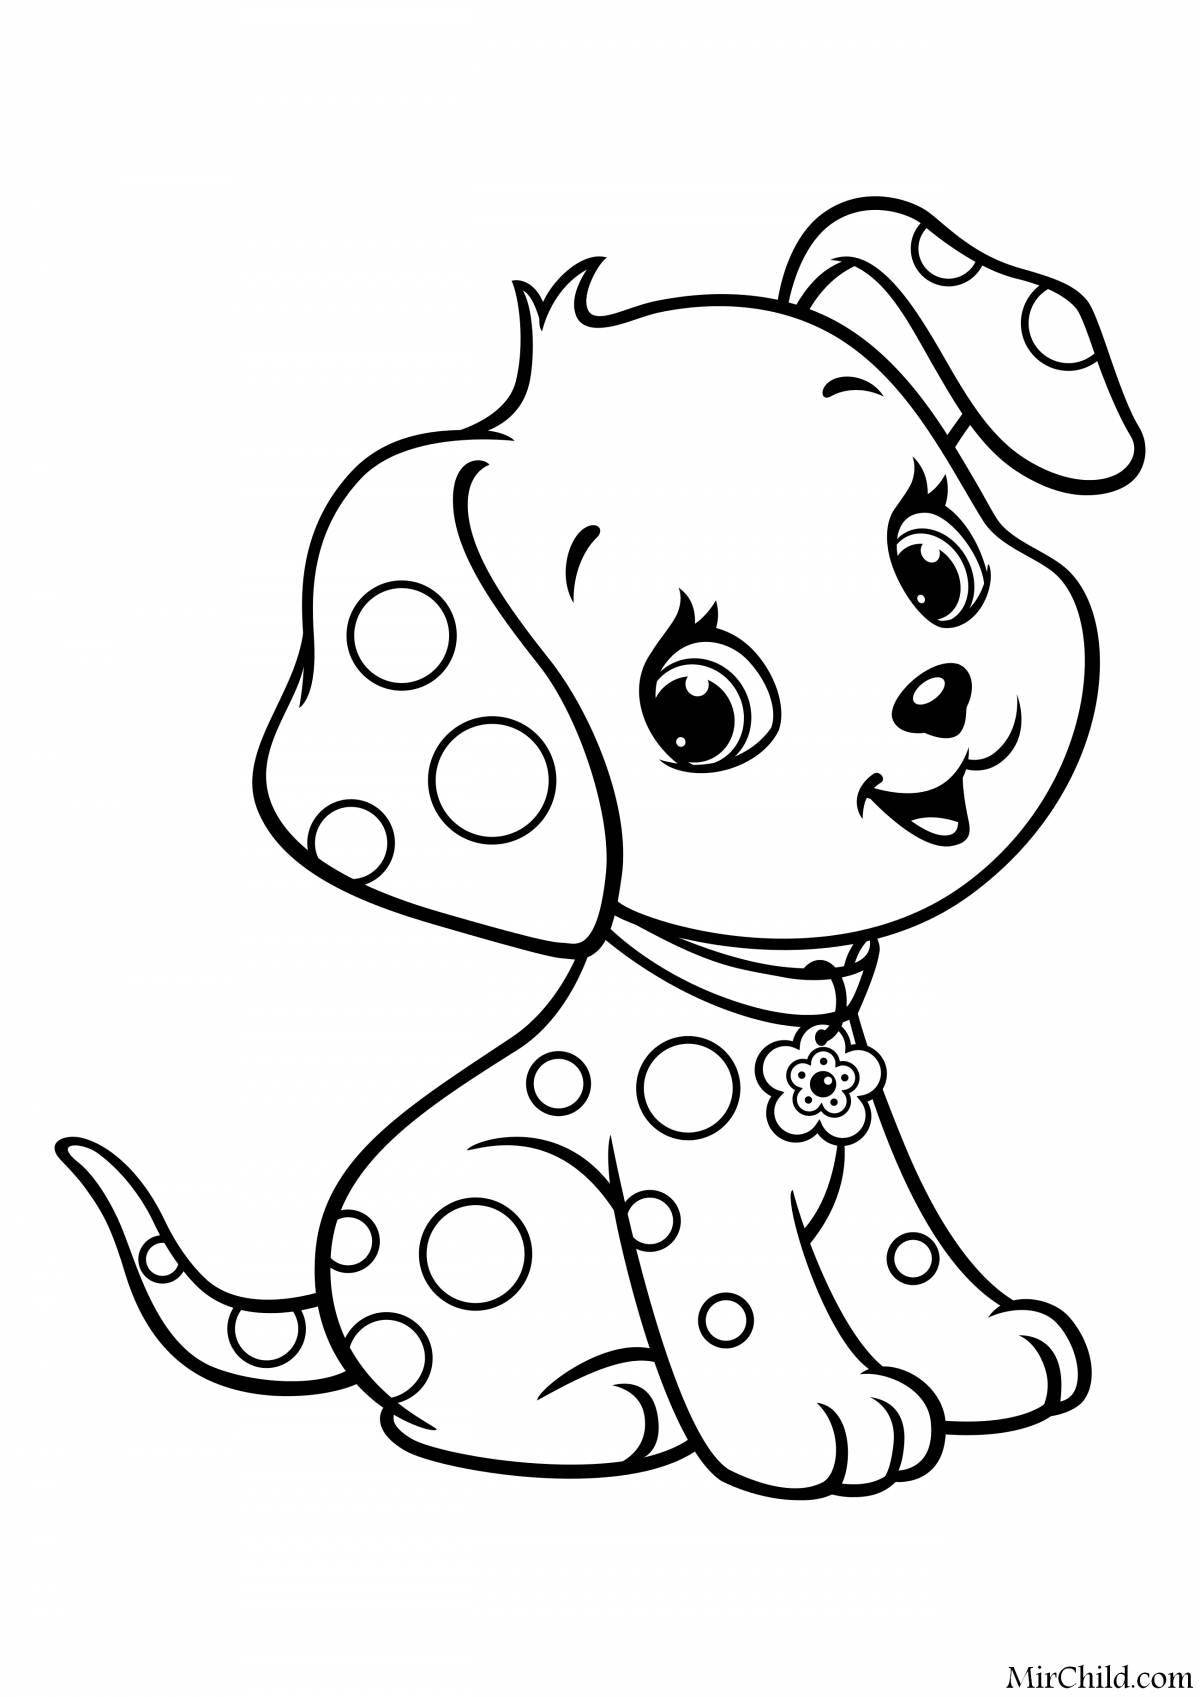 Joyful dog coloring book for 3-4 year olds